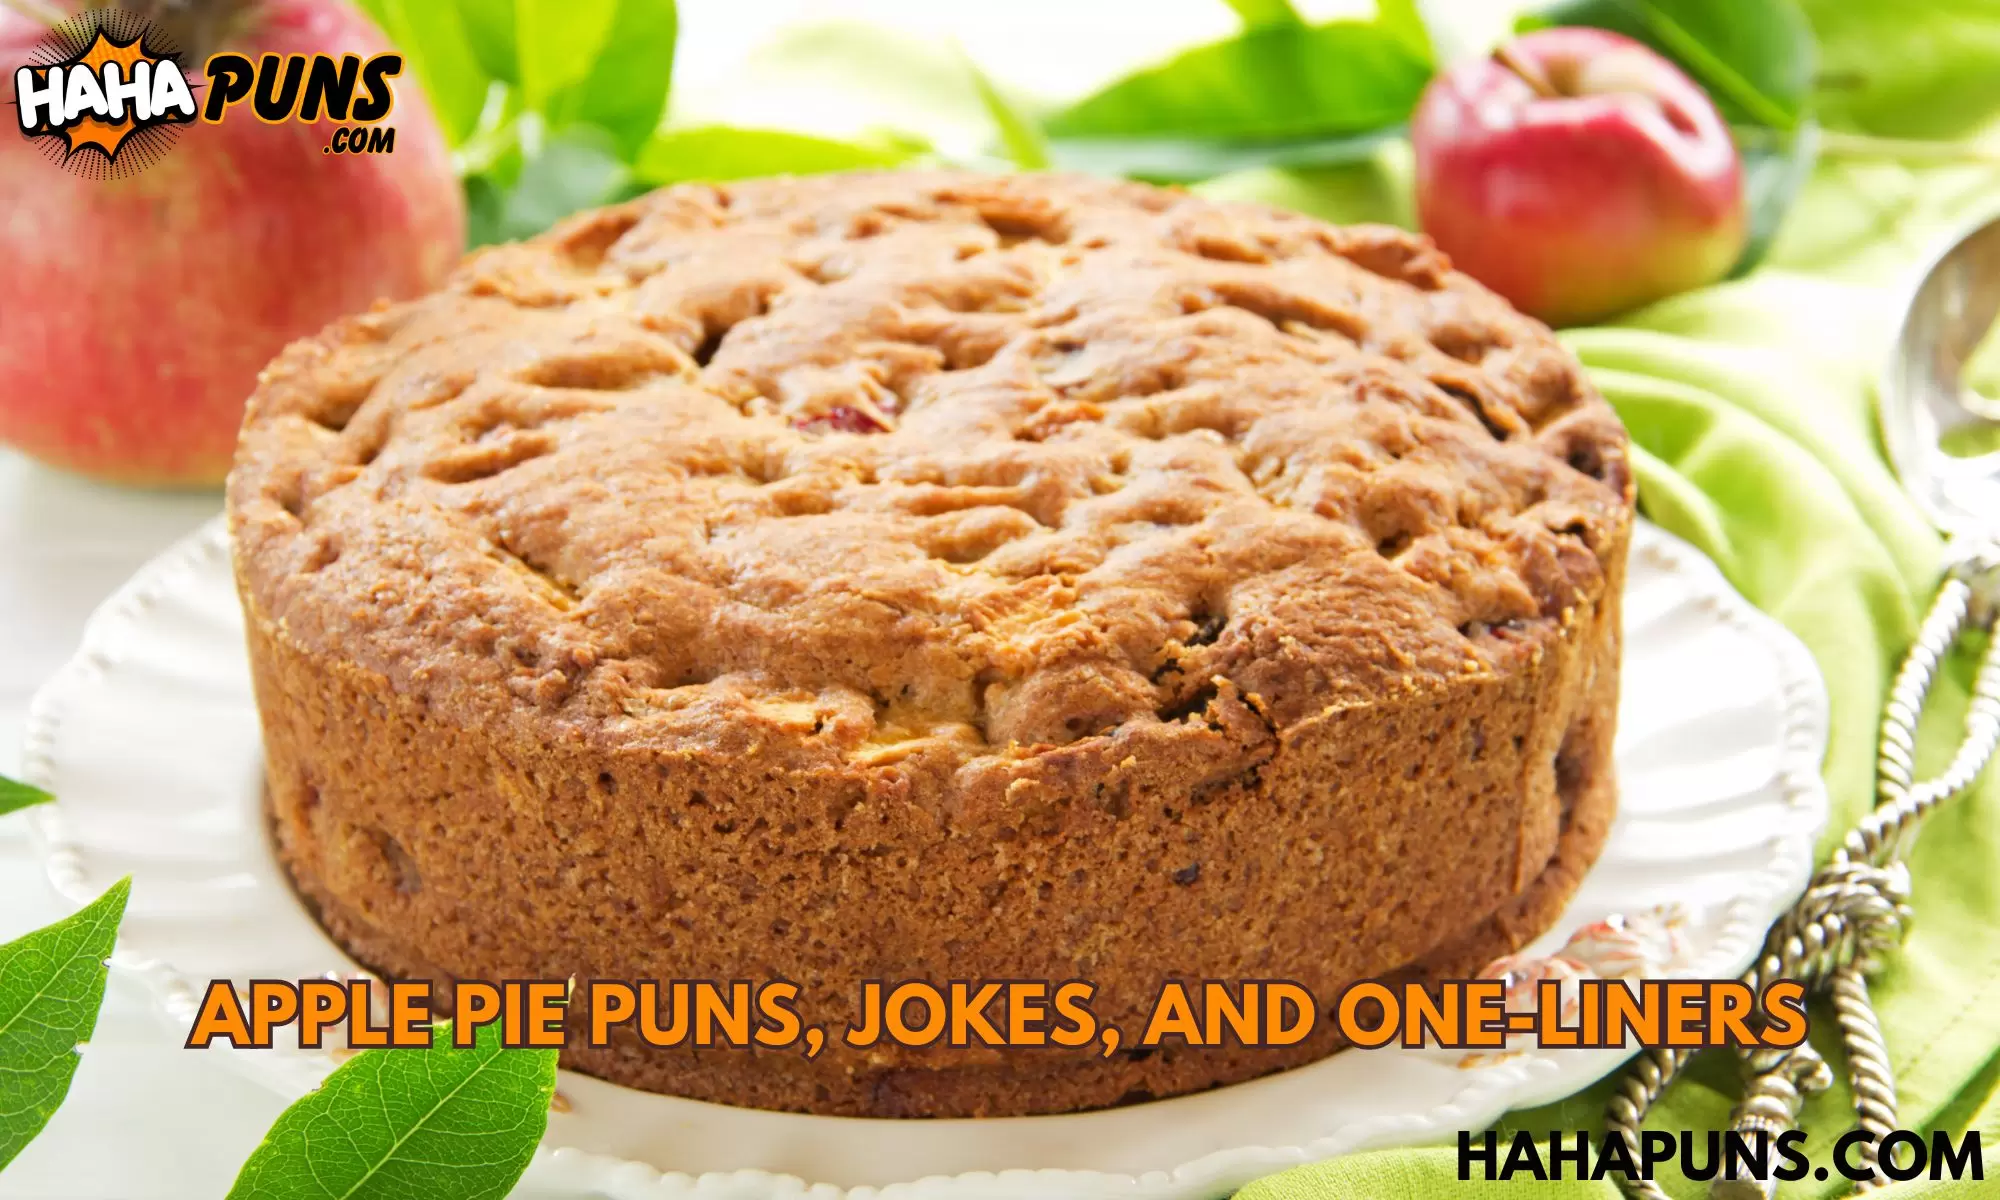 Apple Pie Puns, Jokes, and One-Liners